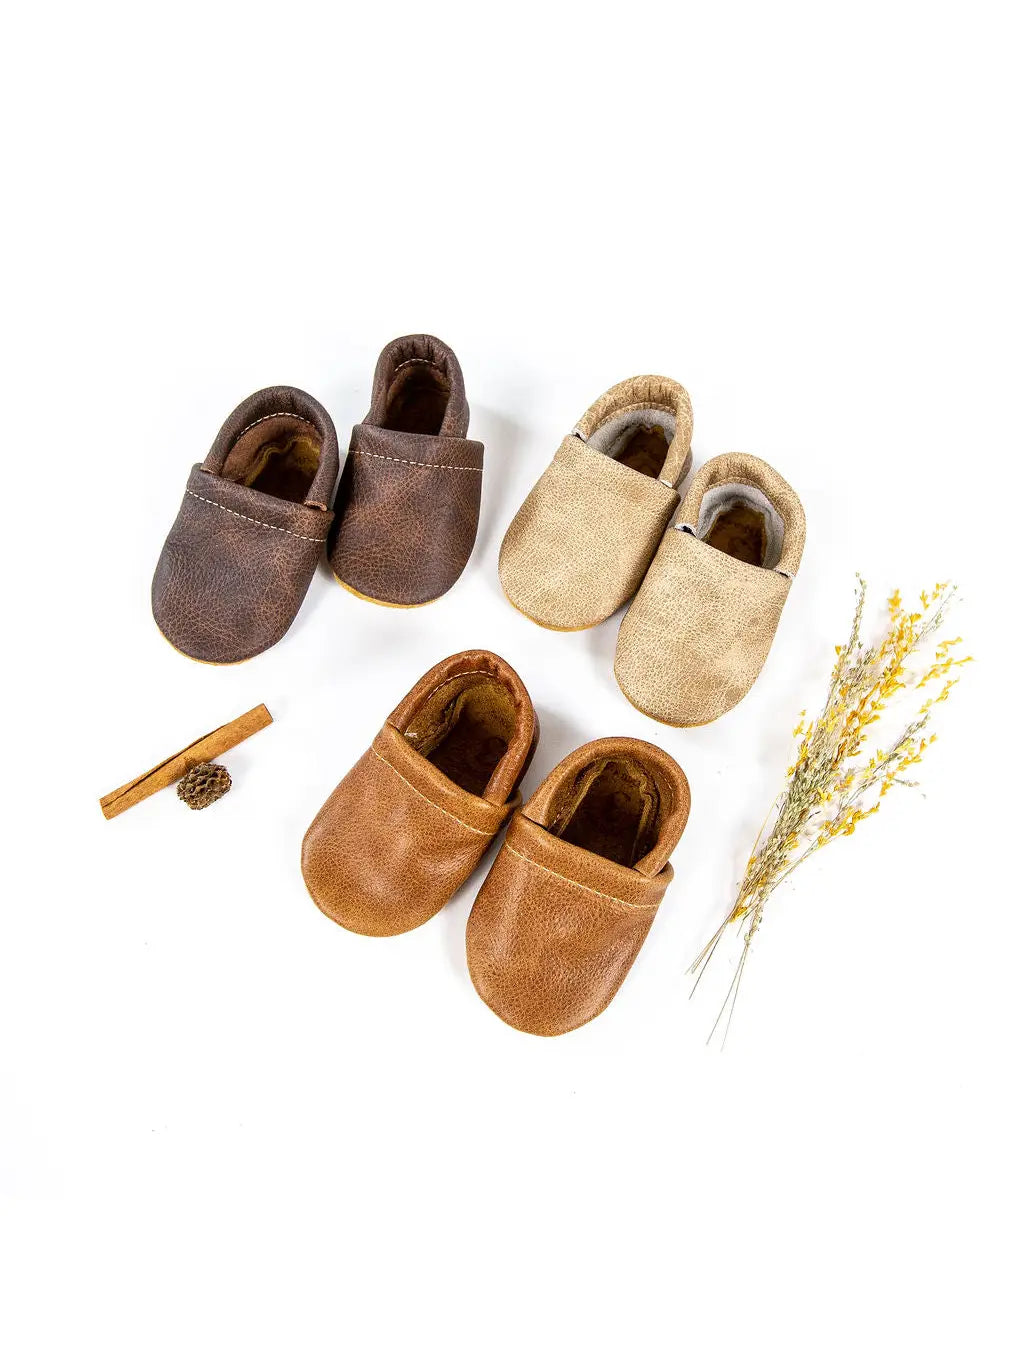 Starry knight brown leather moccasins baby booties 